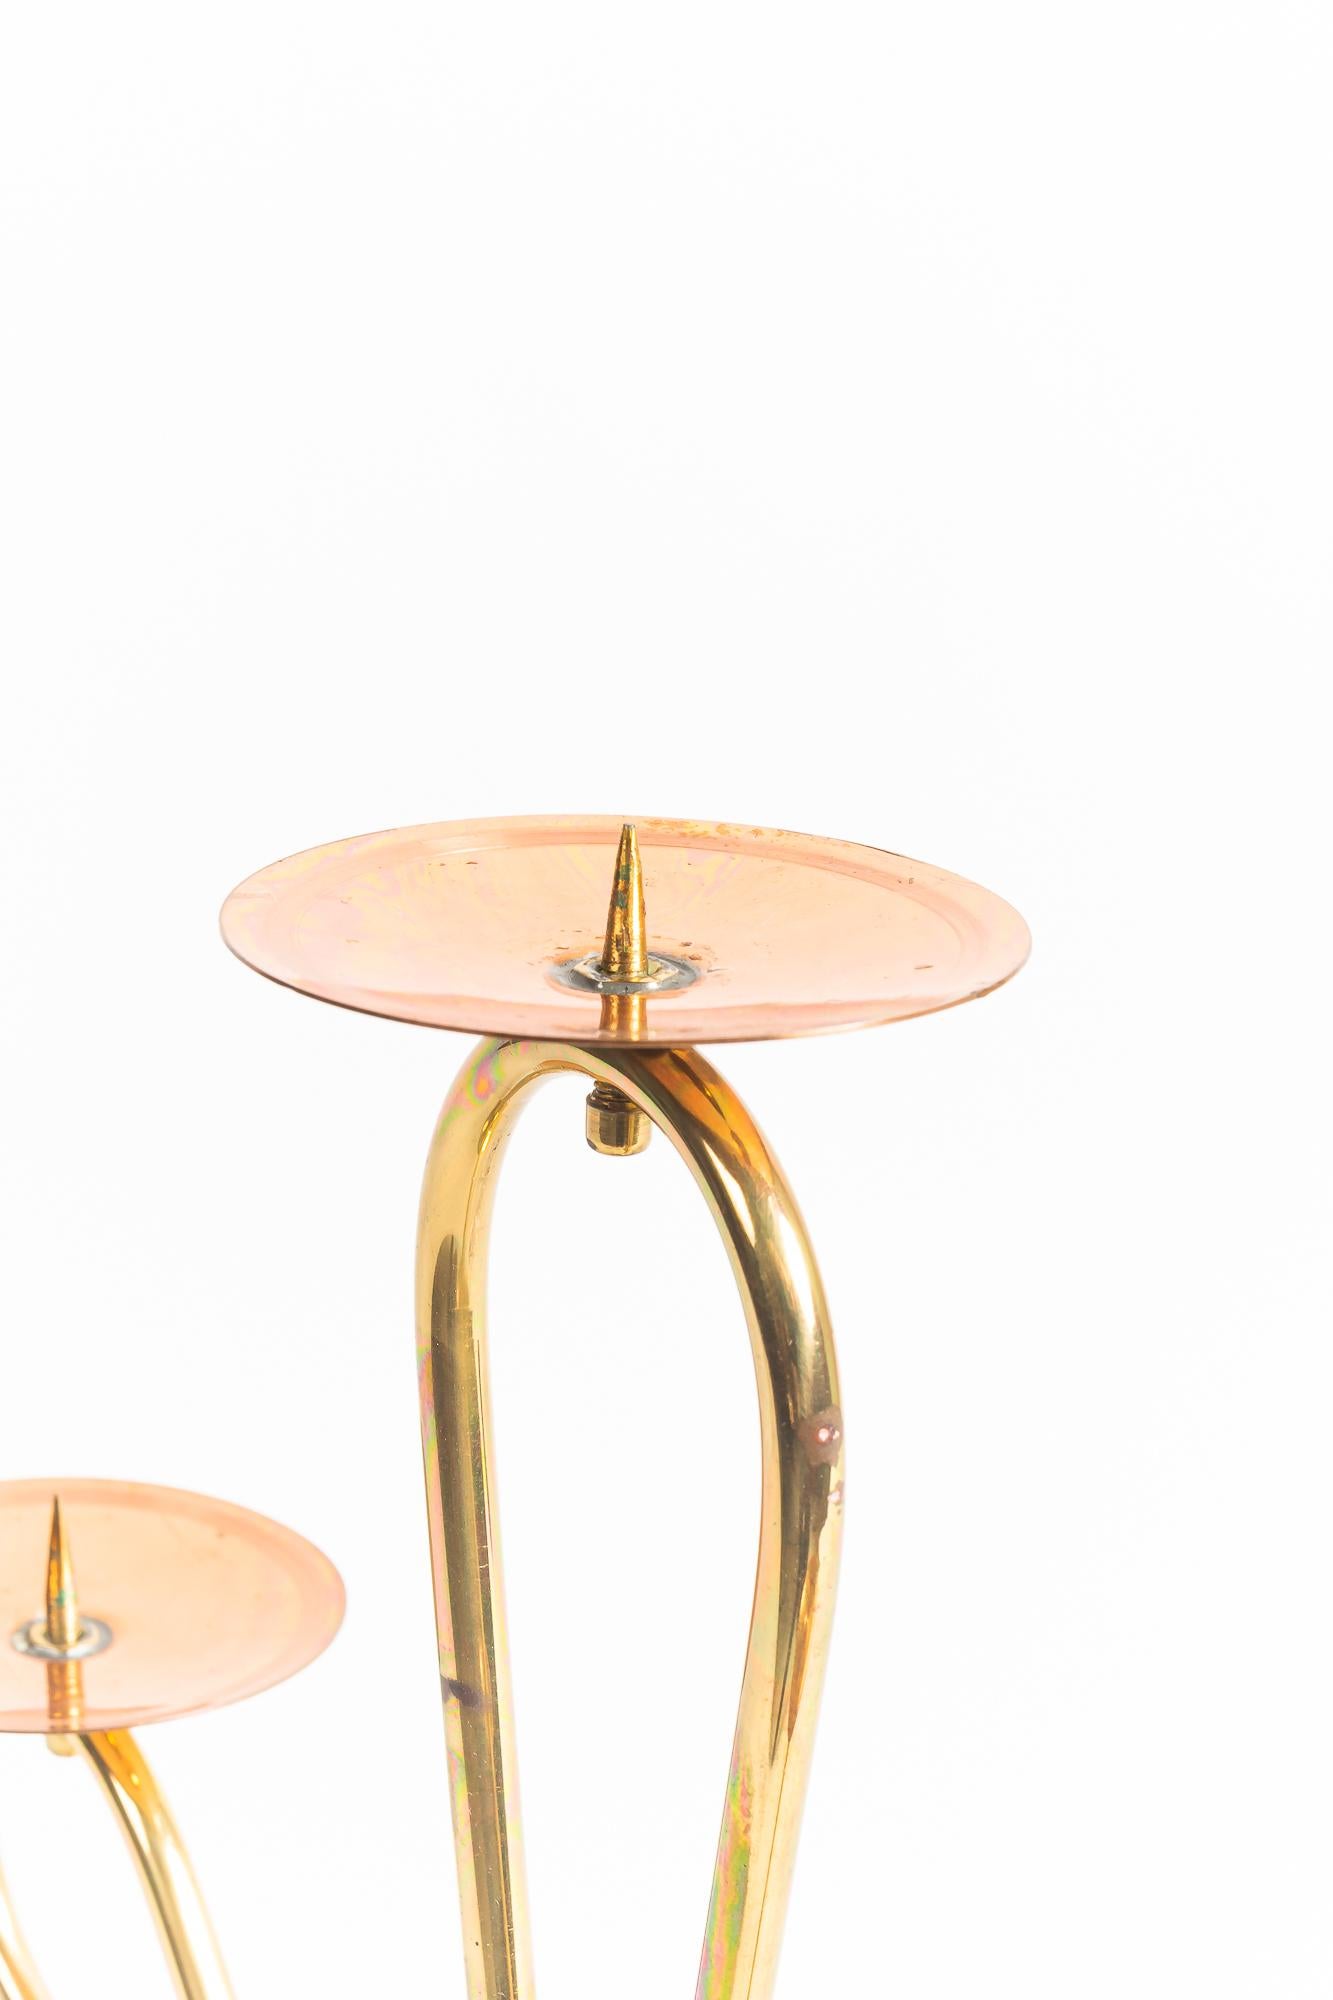 Mid-20th Century Candle Holder Vienna Brass and Copper Combination around 1960s For Sale